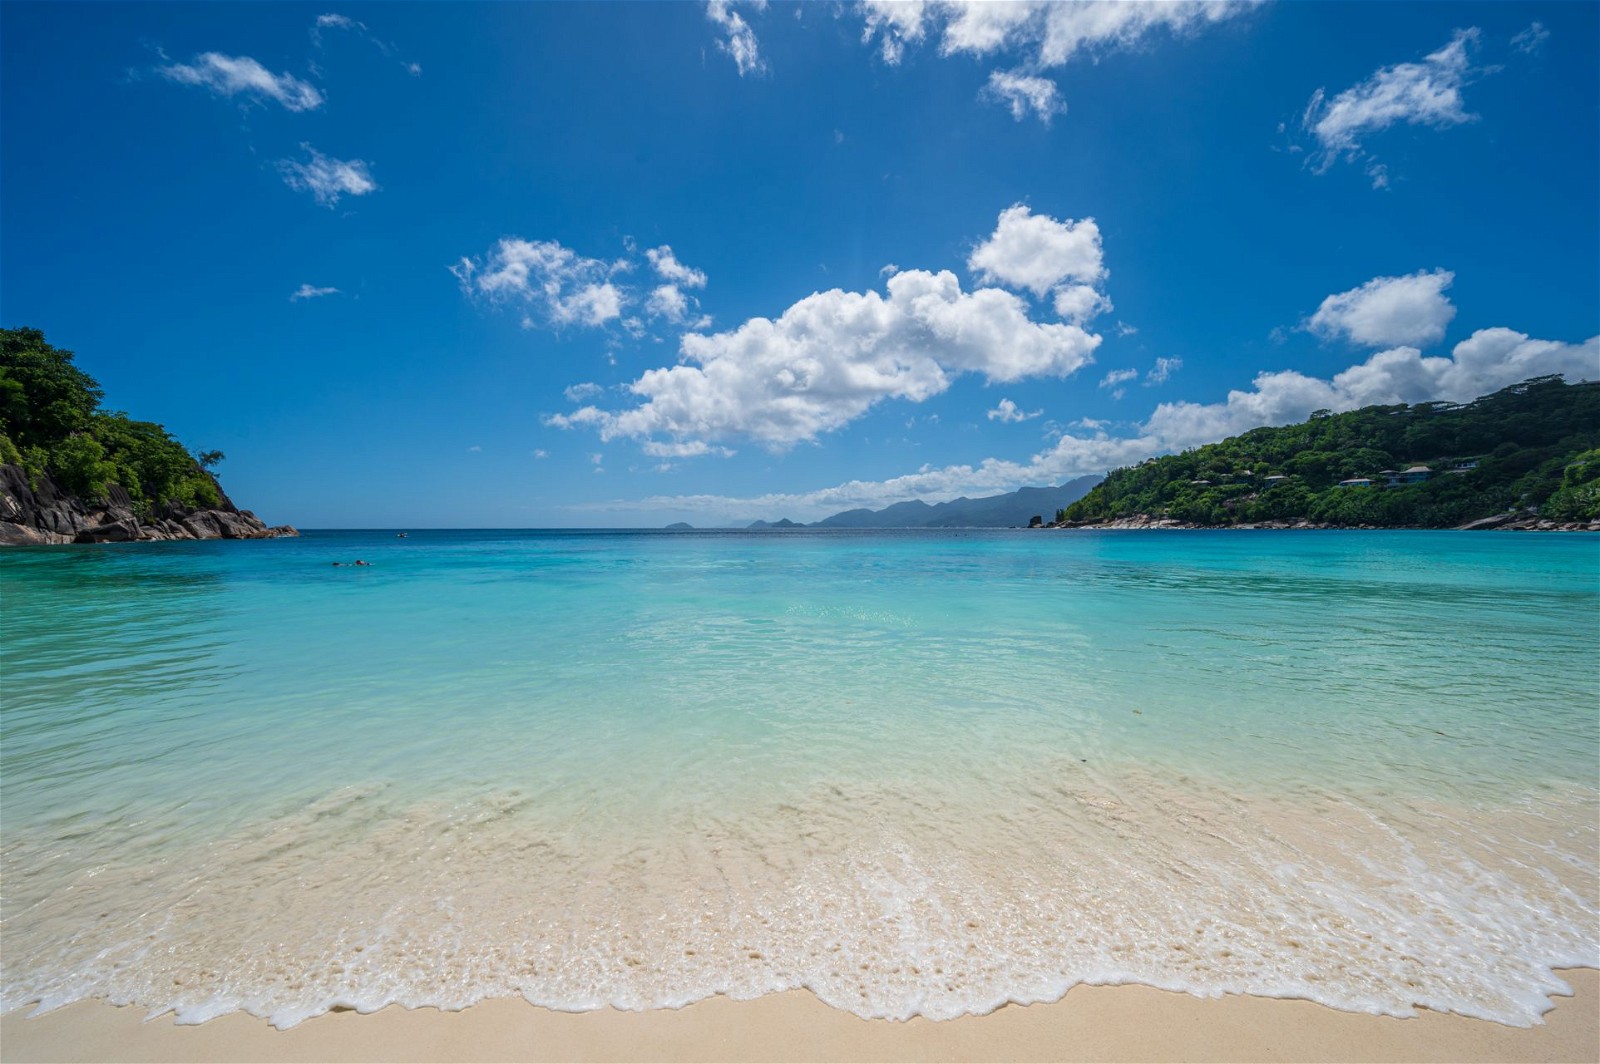 The Seychelles is famous for its stunning beaches and islands,